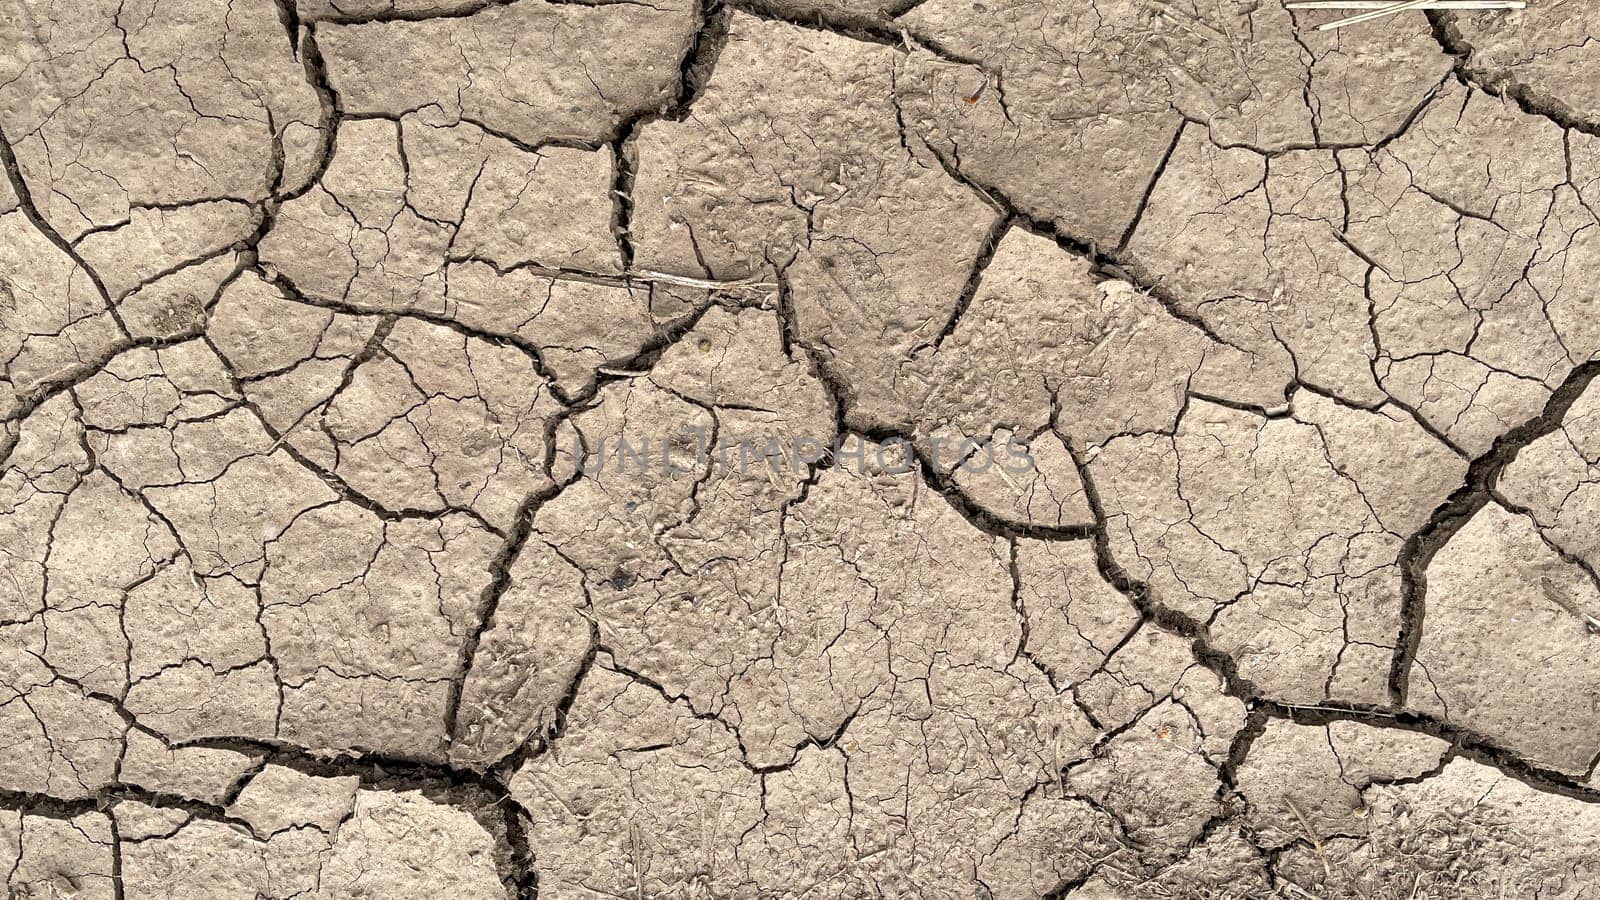 the texture of dry cracked earth.